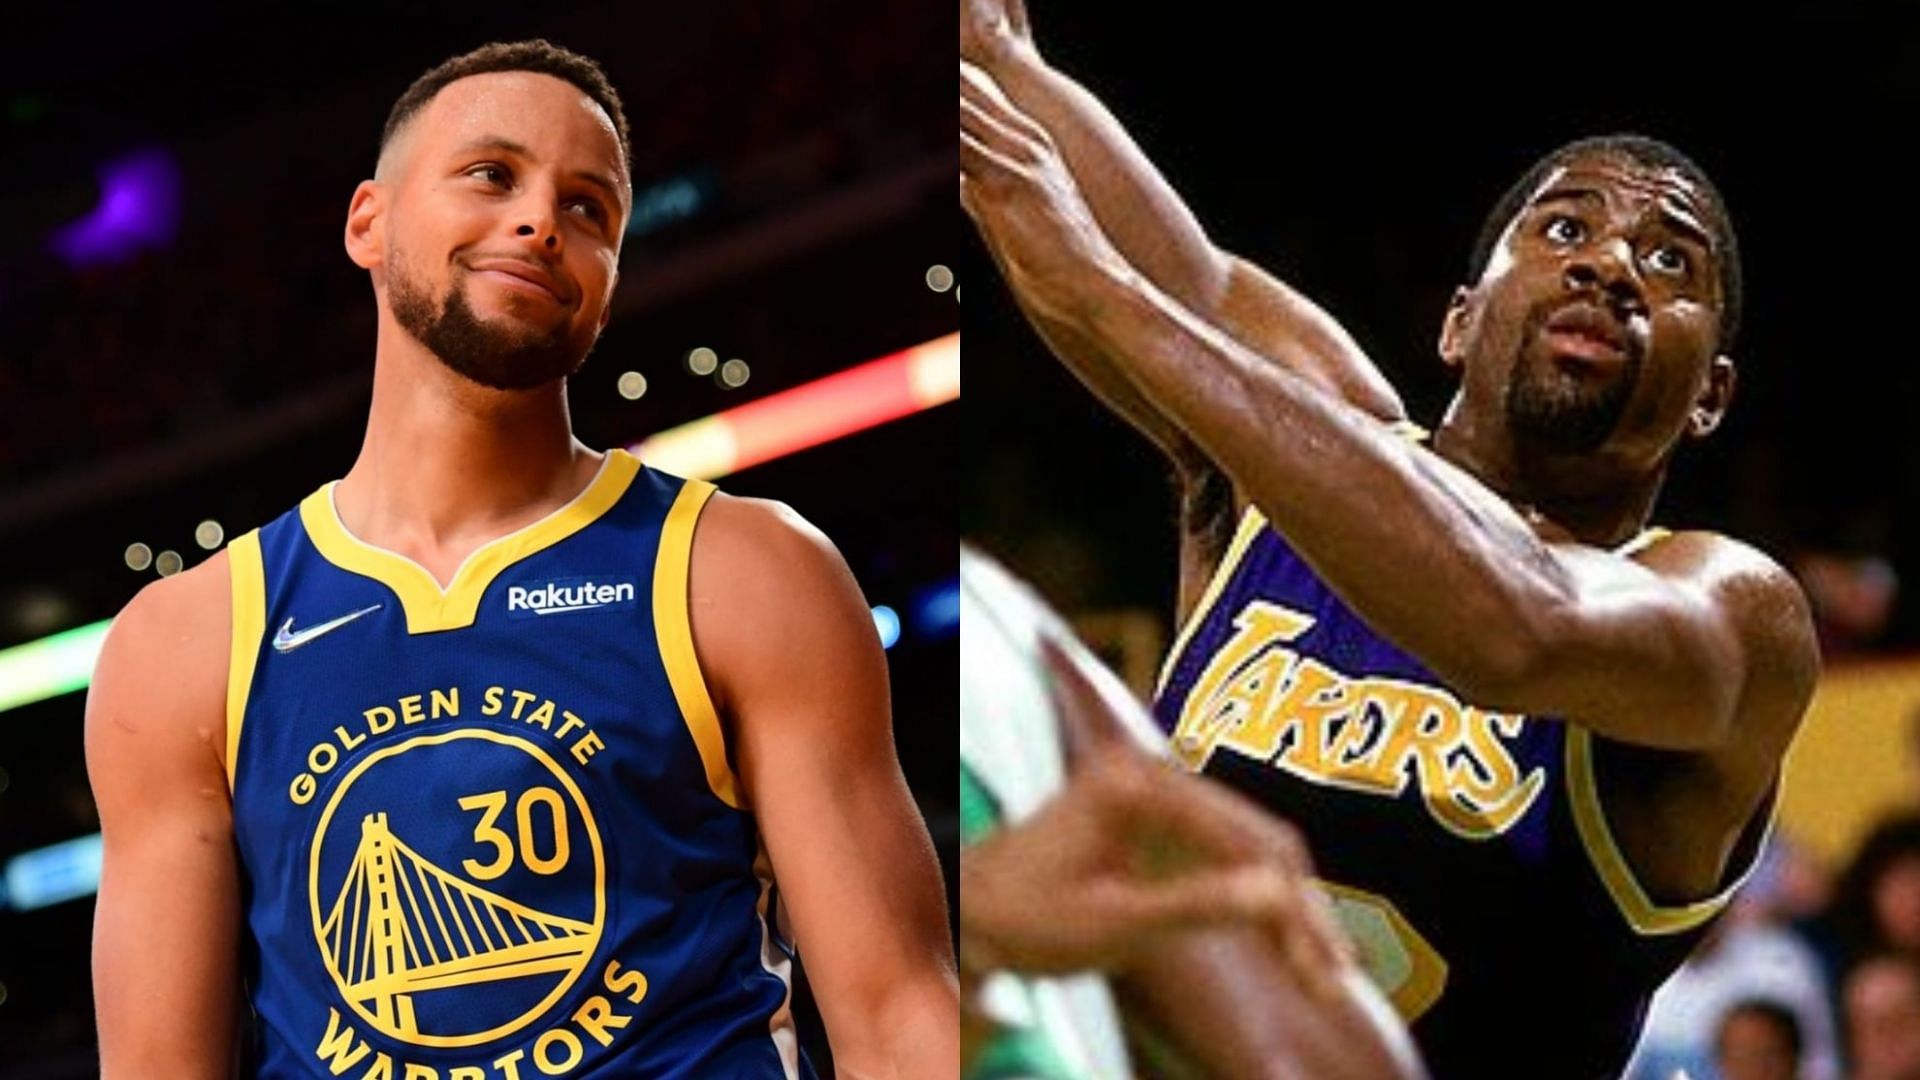 Stephen Curry vs. Magic Johnson stats: GOAT point guard debate heats up  after Warriors star's comments